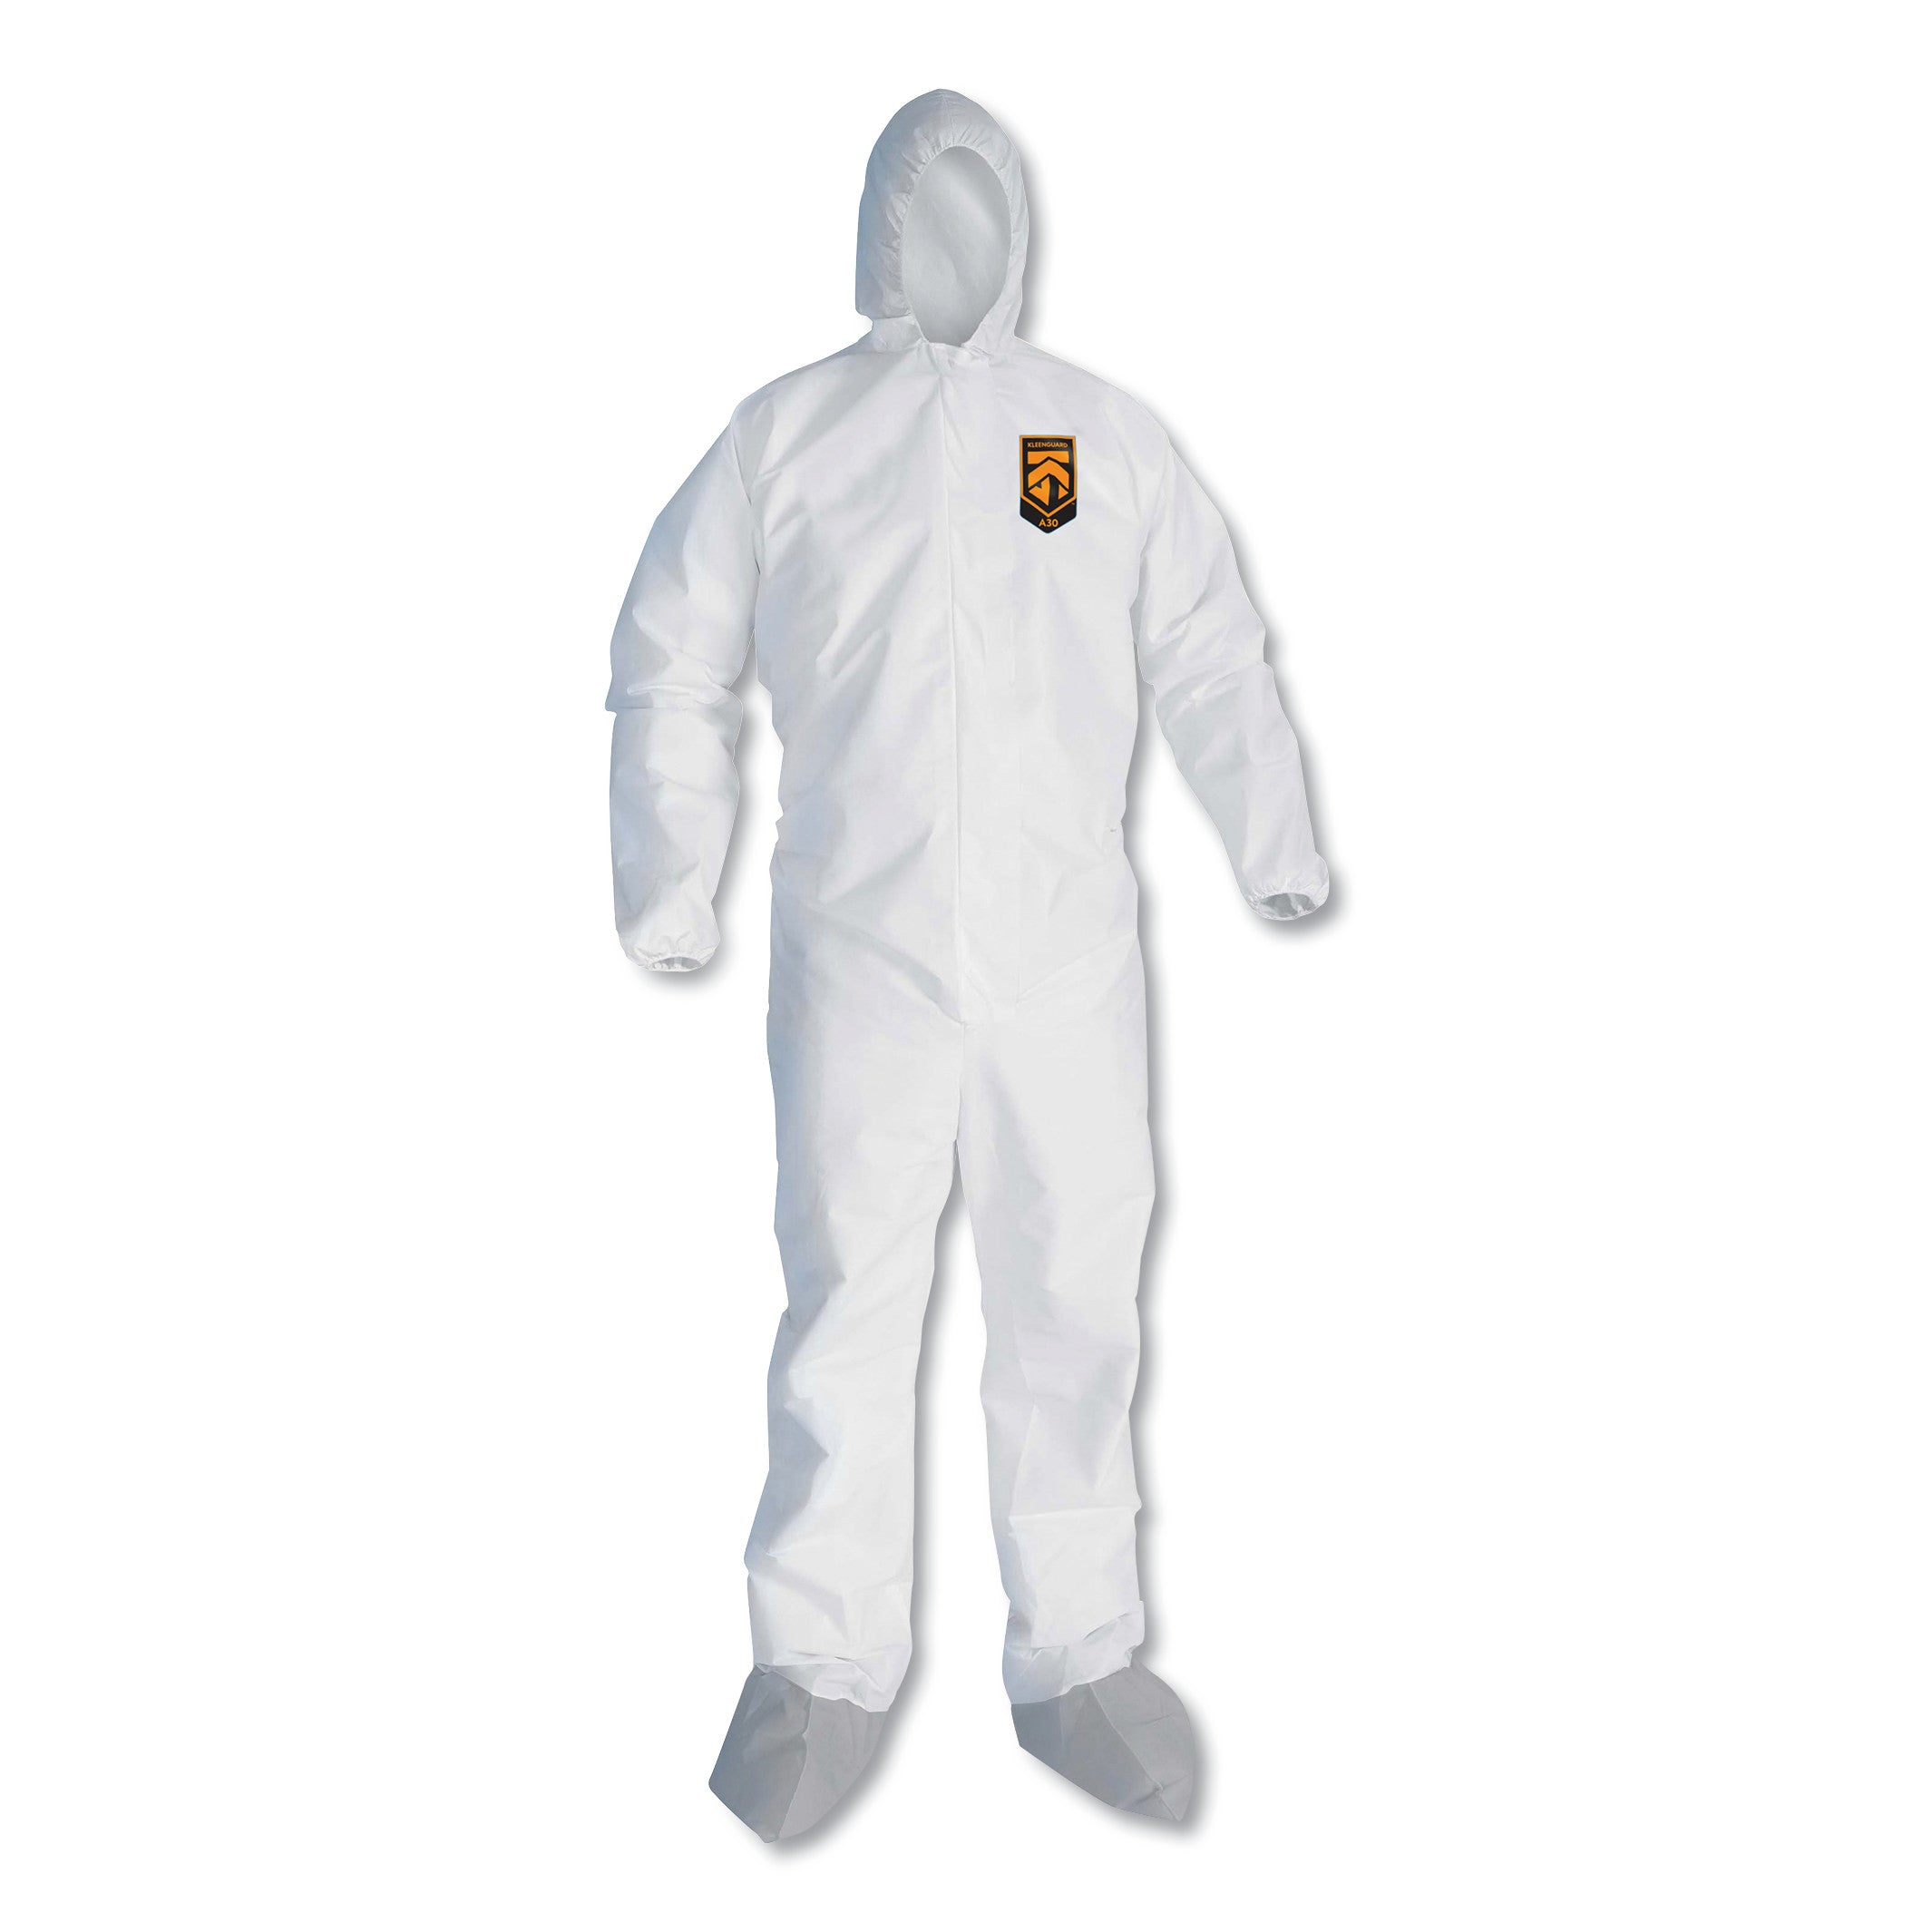 a45-liquid-and-particle-protection-surface-prep-paint-coveralls-large-white-25-carton_kcc48973 - 1